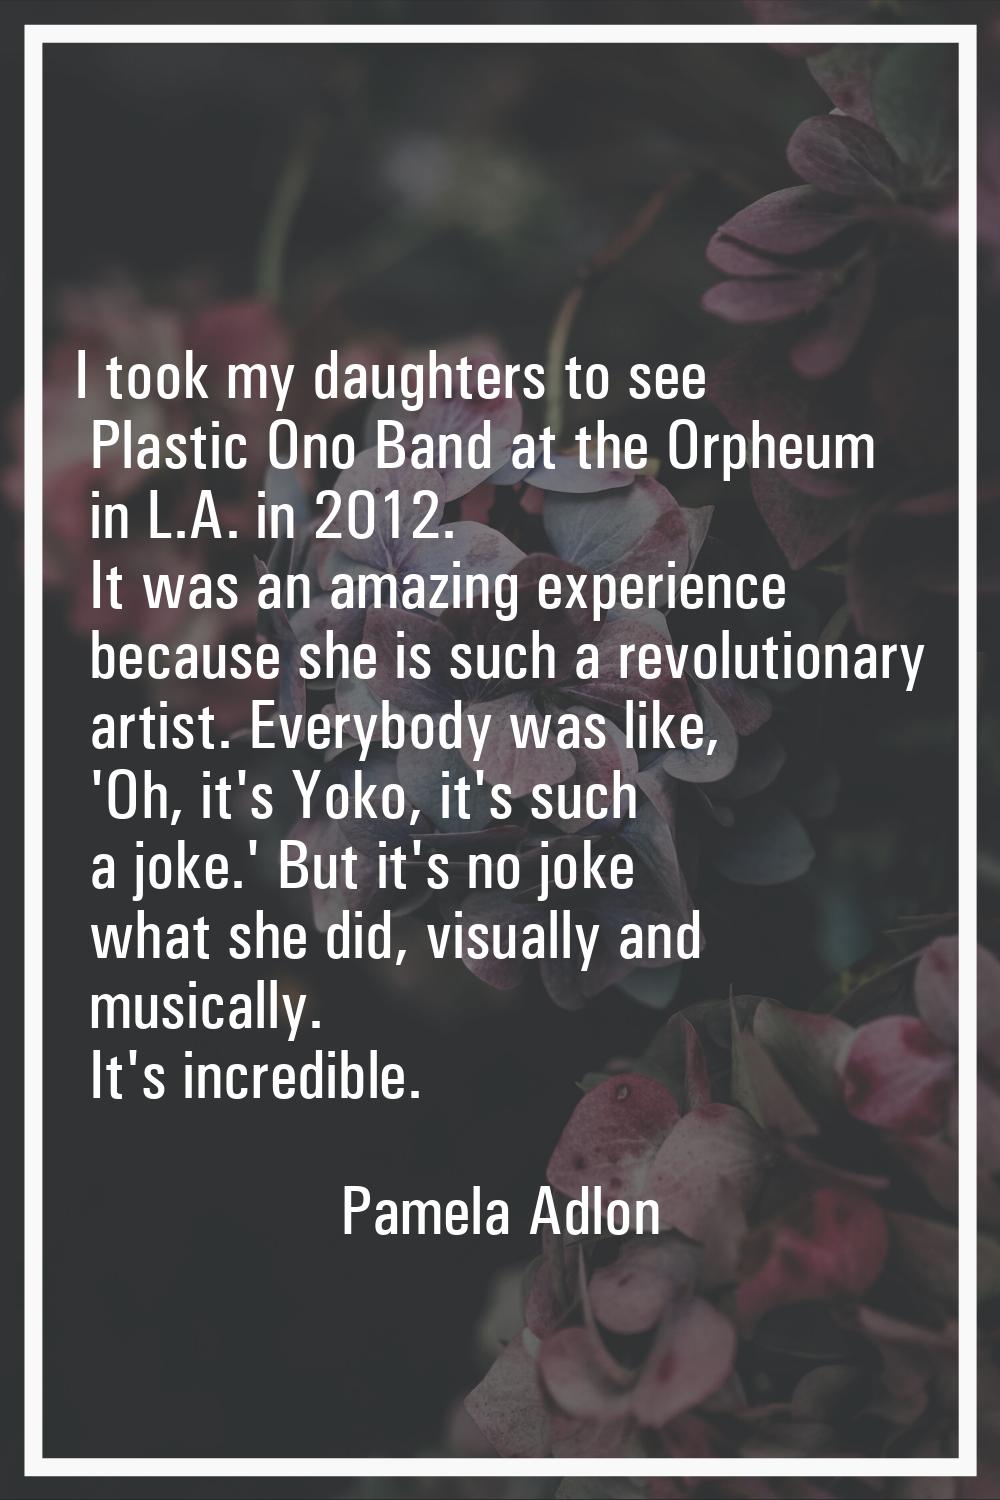 I took my daughters to see Plastic Ono Band at the Orpheum in L.A. in 2012. It was an amazing exper